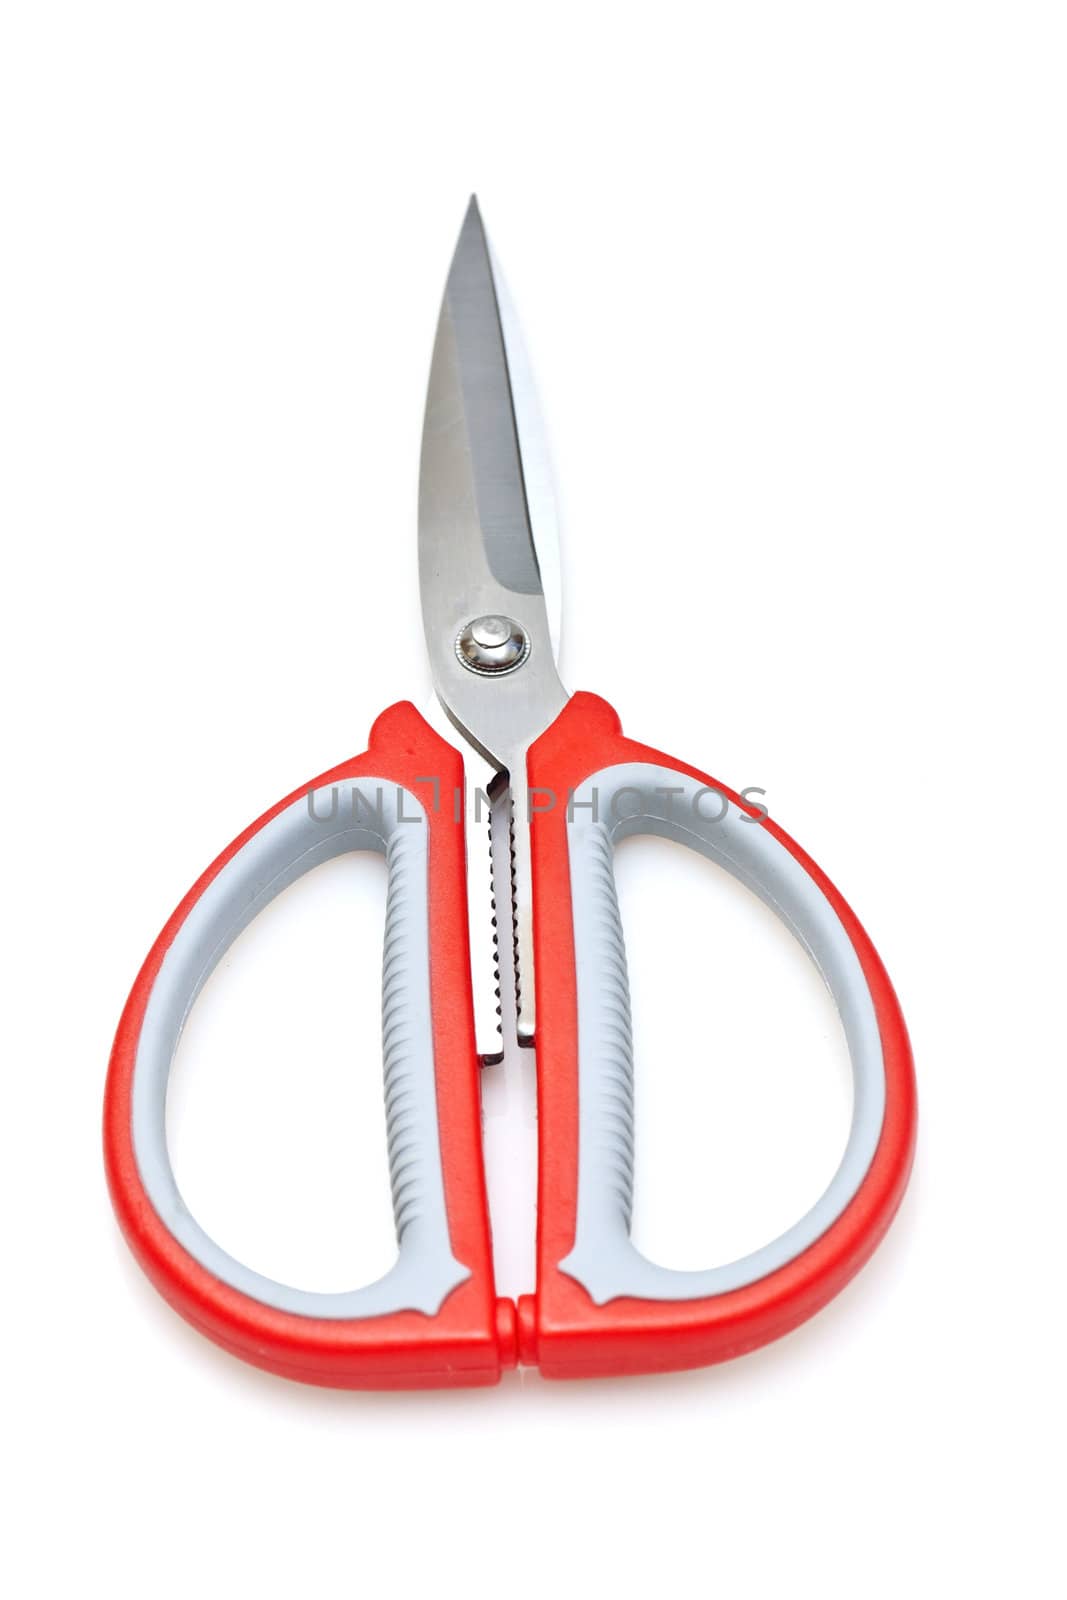 Red scissors isolated on white background by kawing921